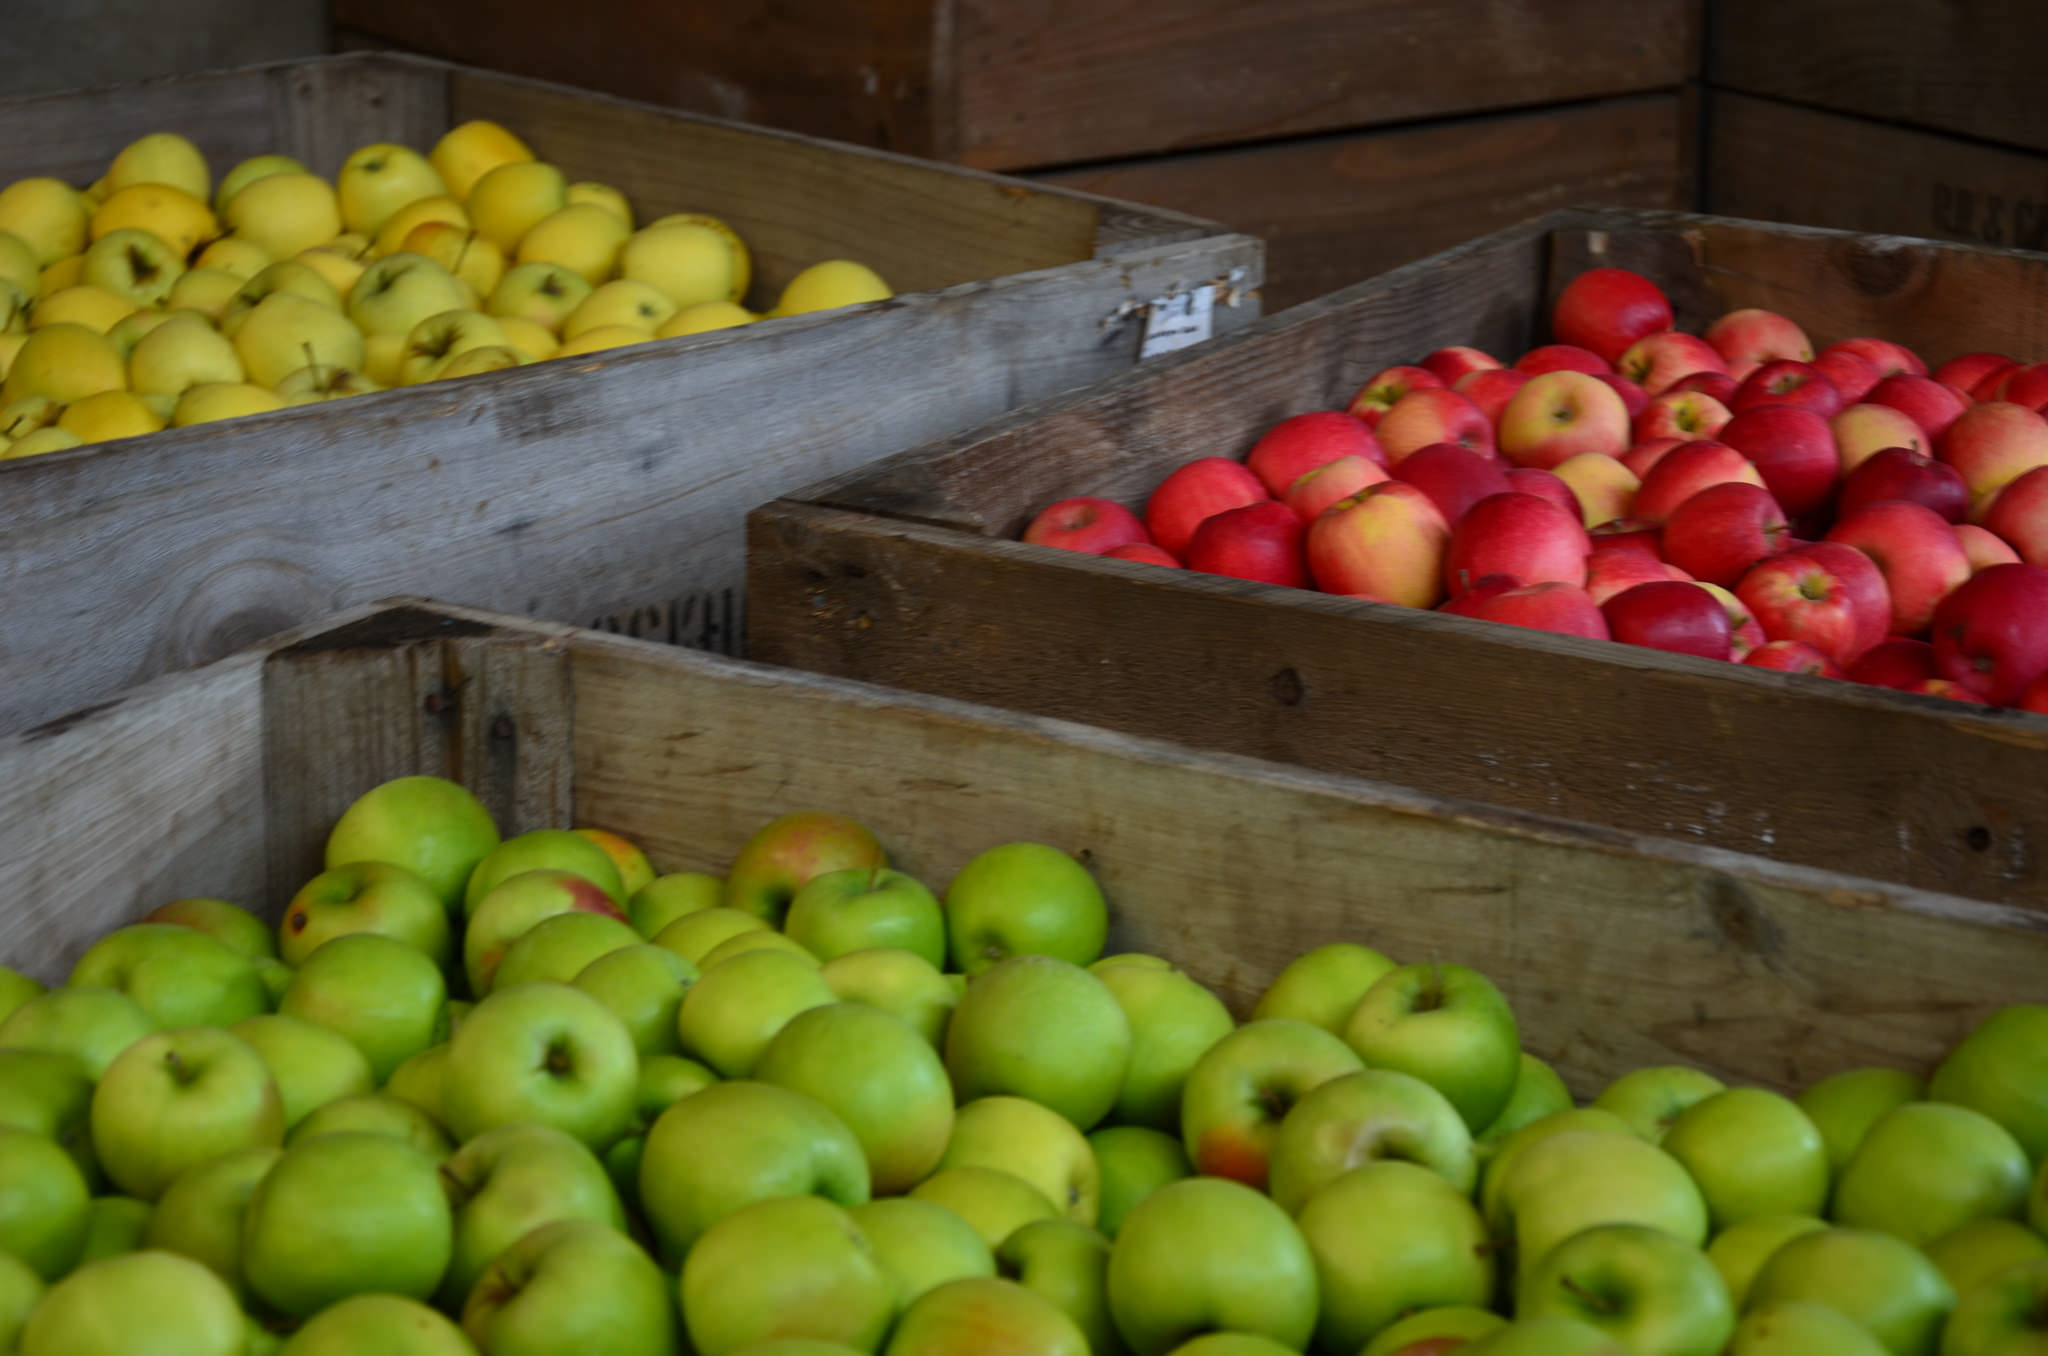 Bins of apples at Otherwood Orchards, South Australia (Apple and Pear Australia Ltd/Flickr/CC BY 2.0)